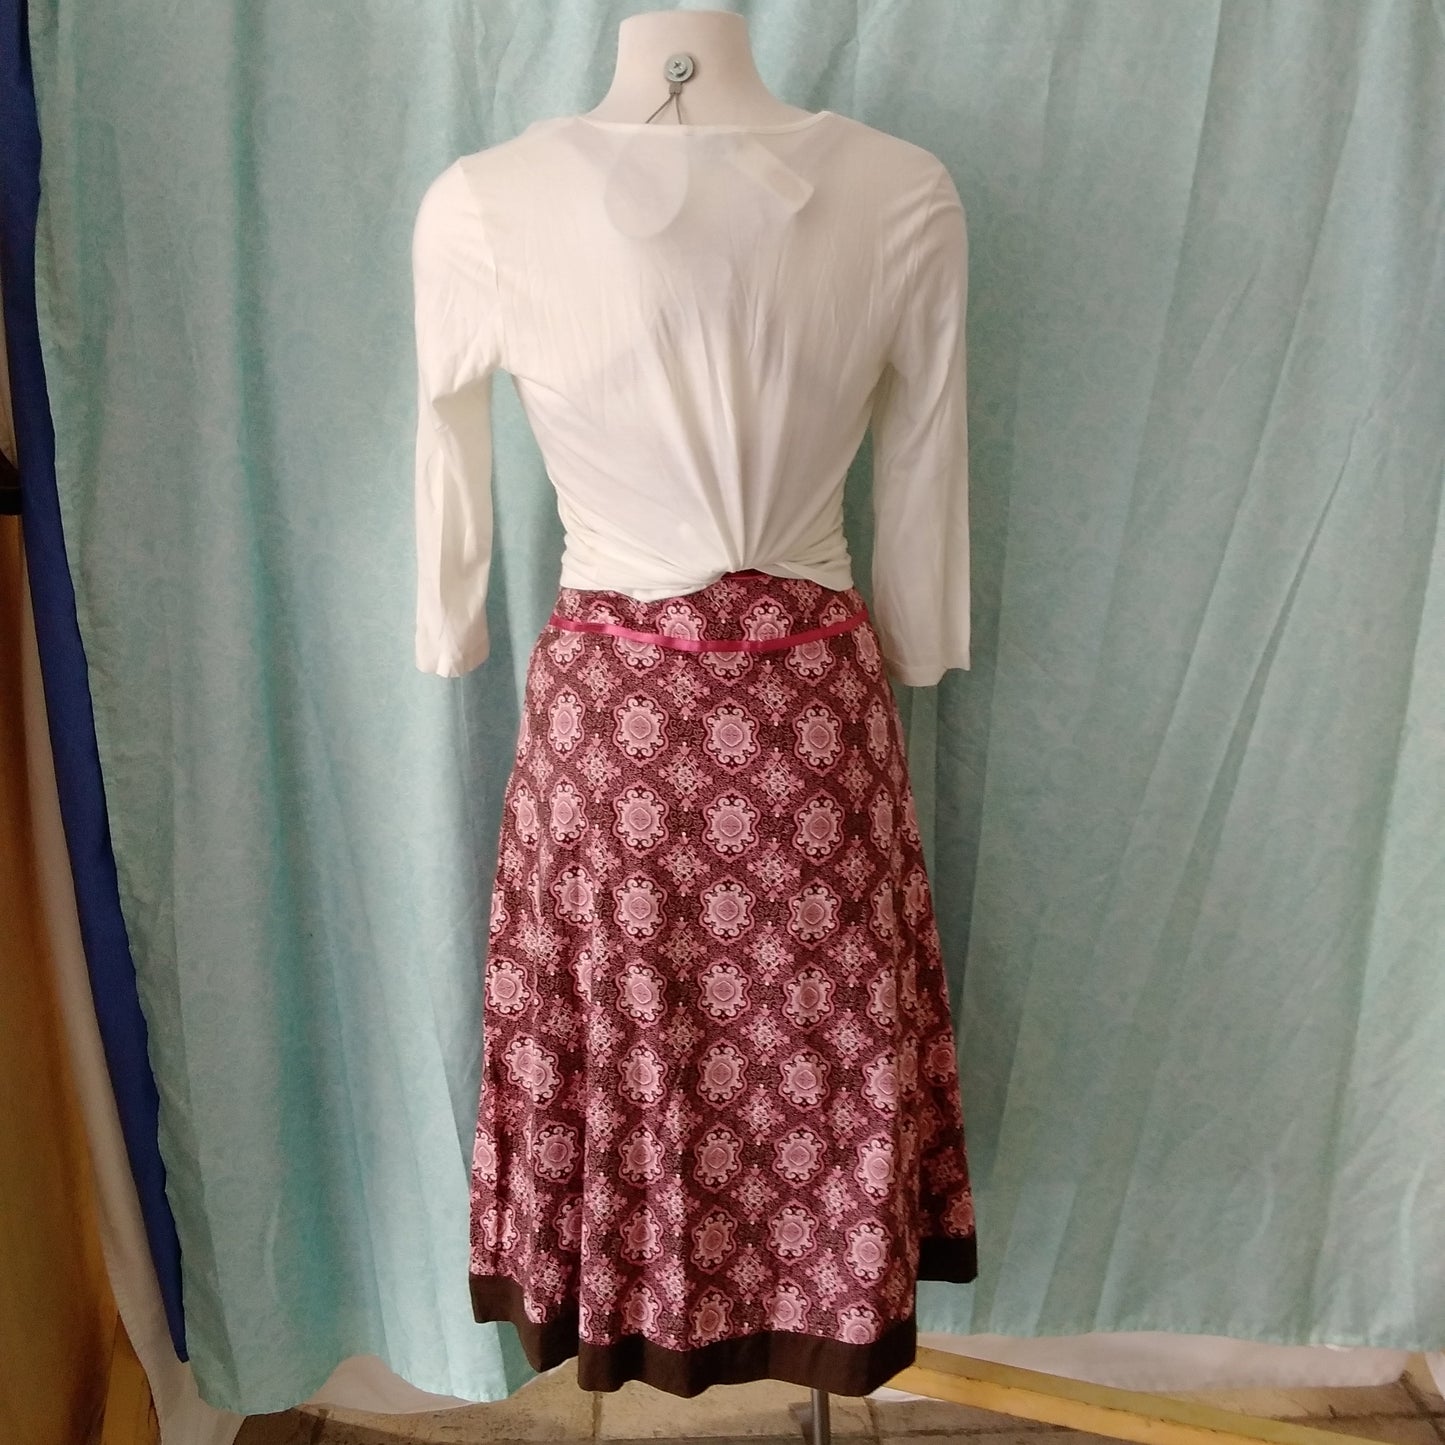 Linden Hill Women's Pink and Brown Skirt - Size 4